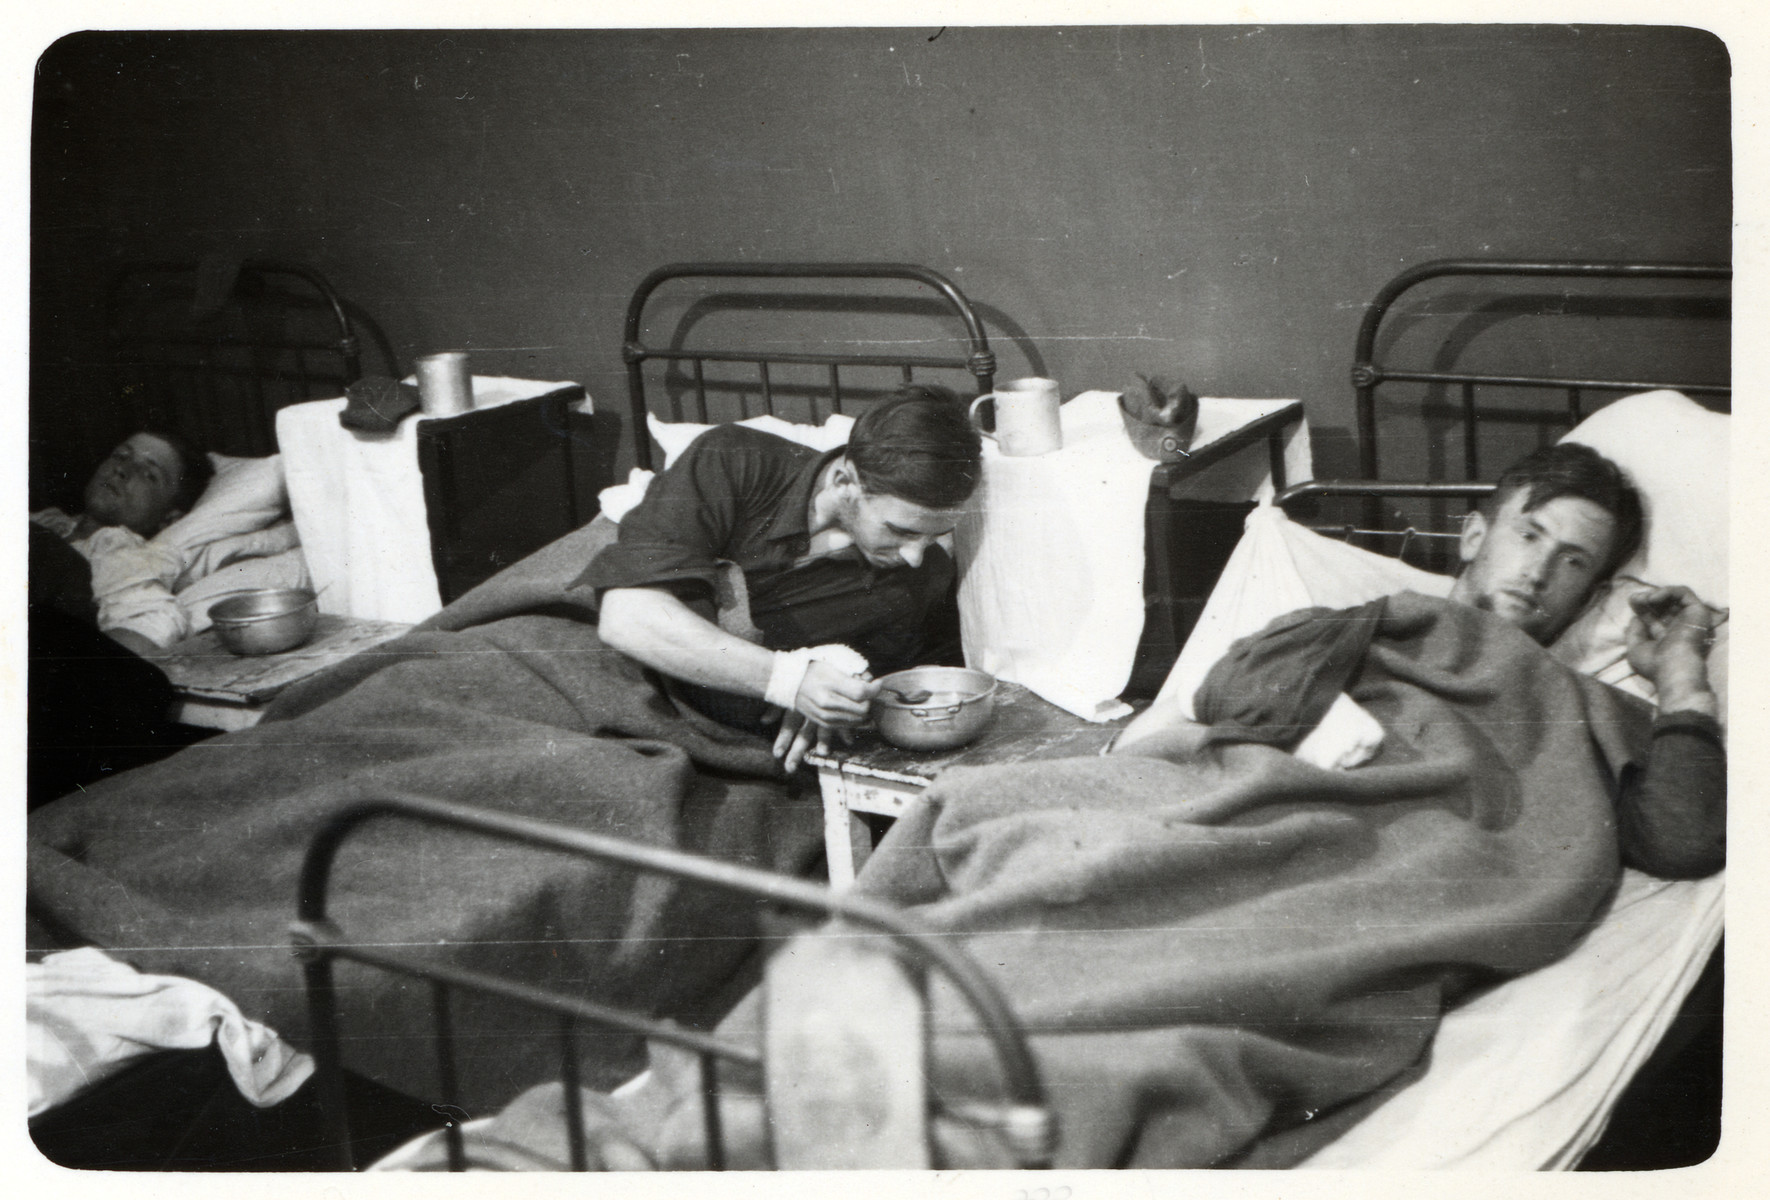 Wounded German POWs rest in a makeshift hospital in besieged Warsaw.